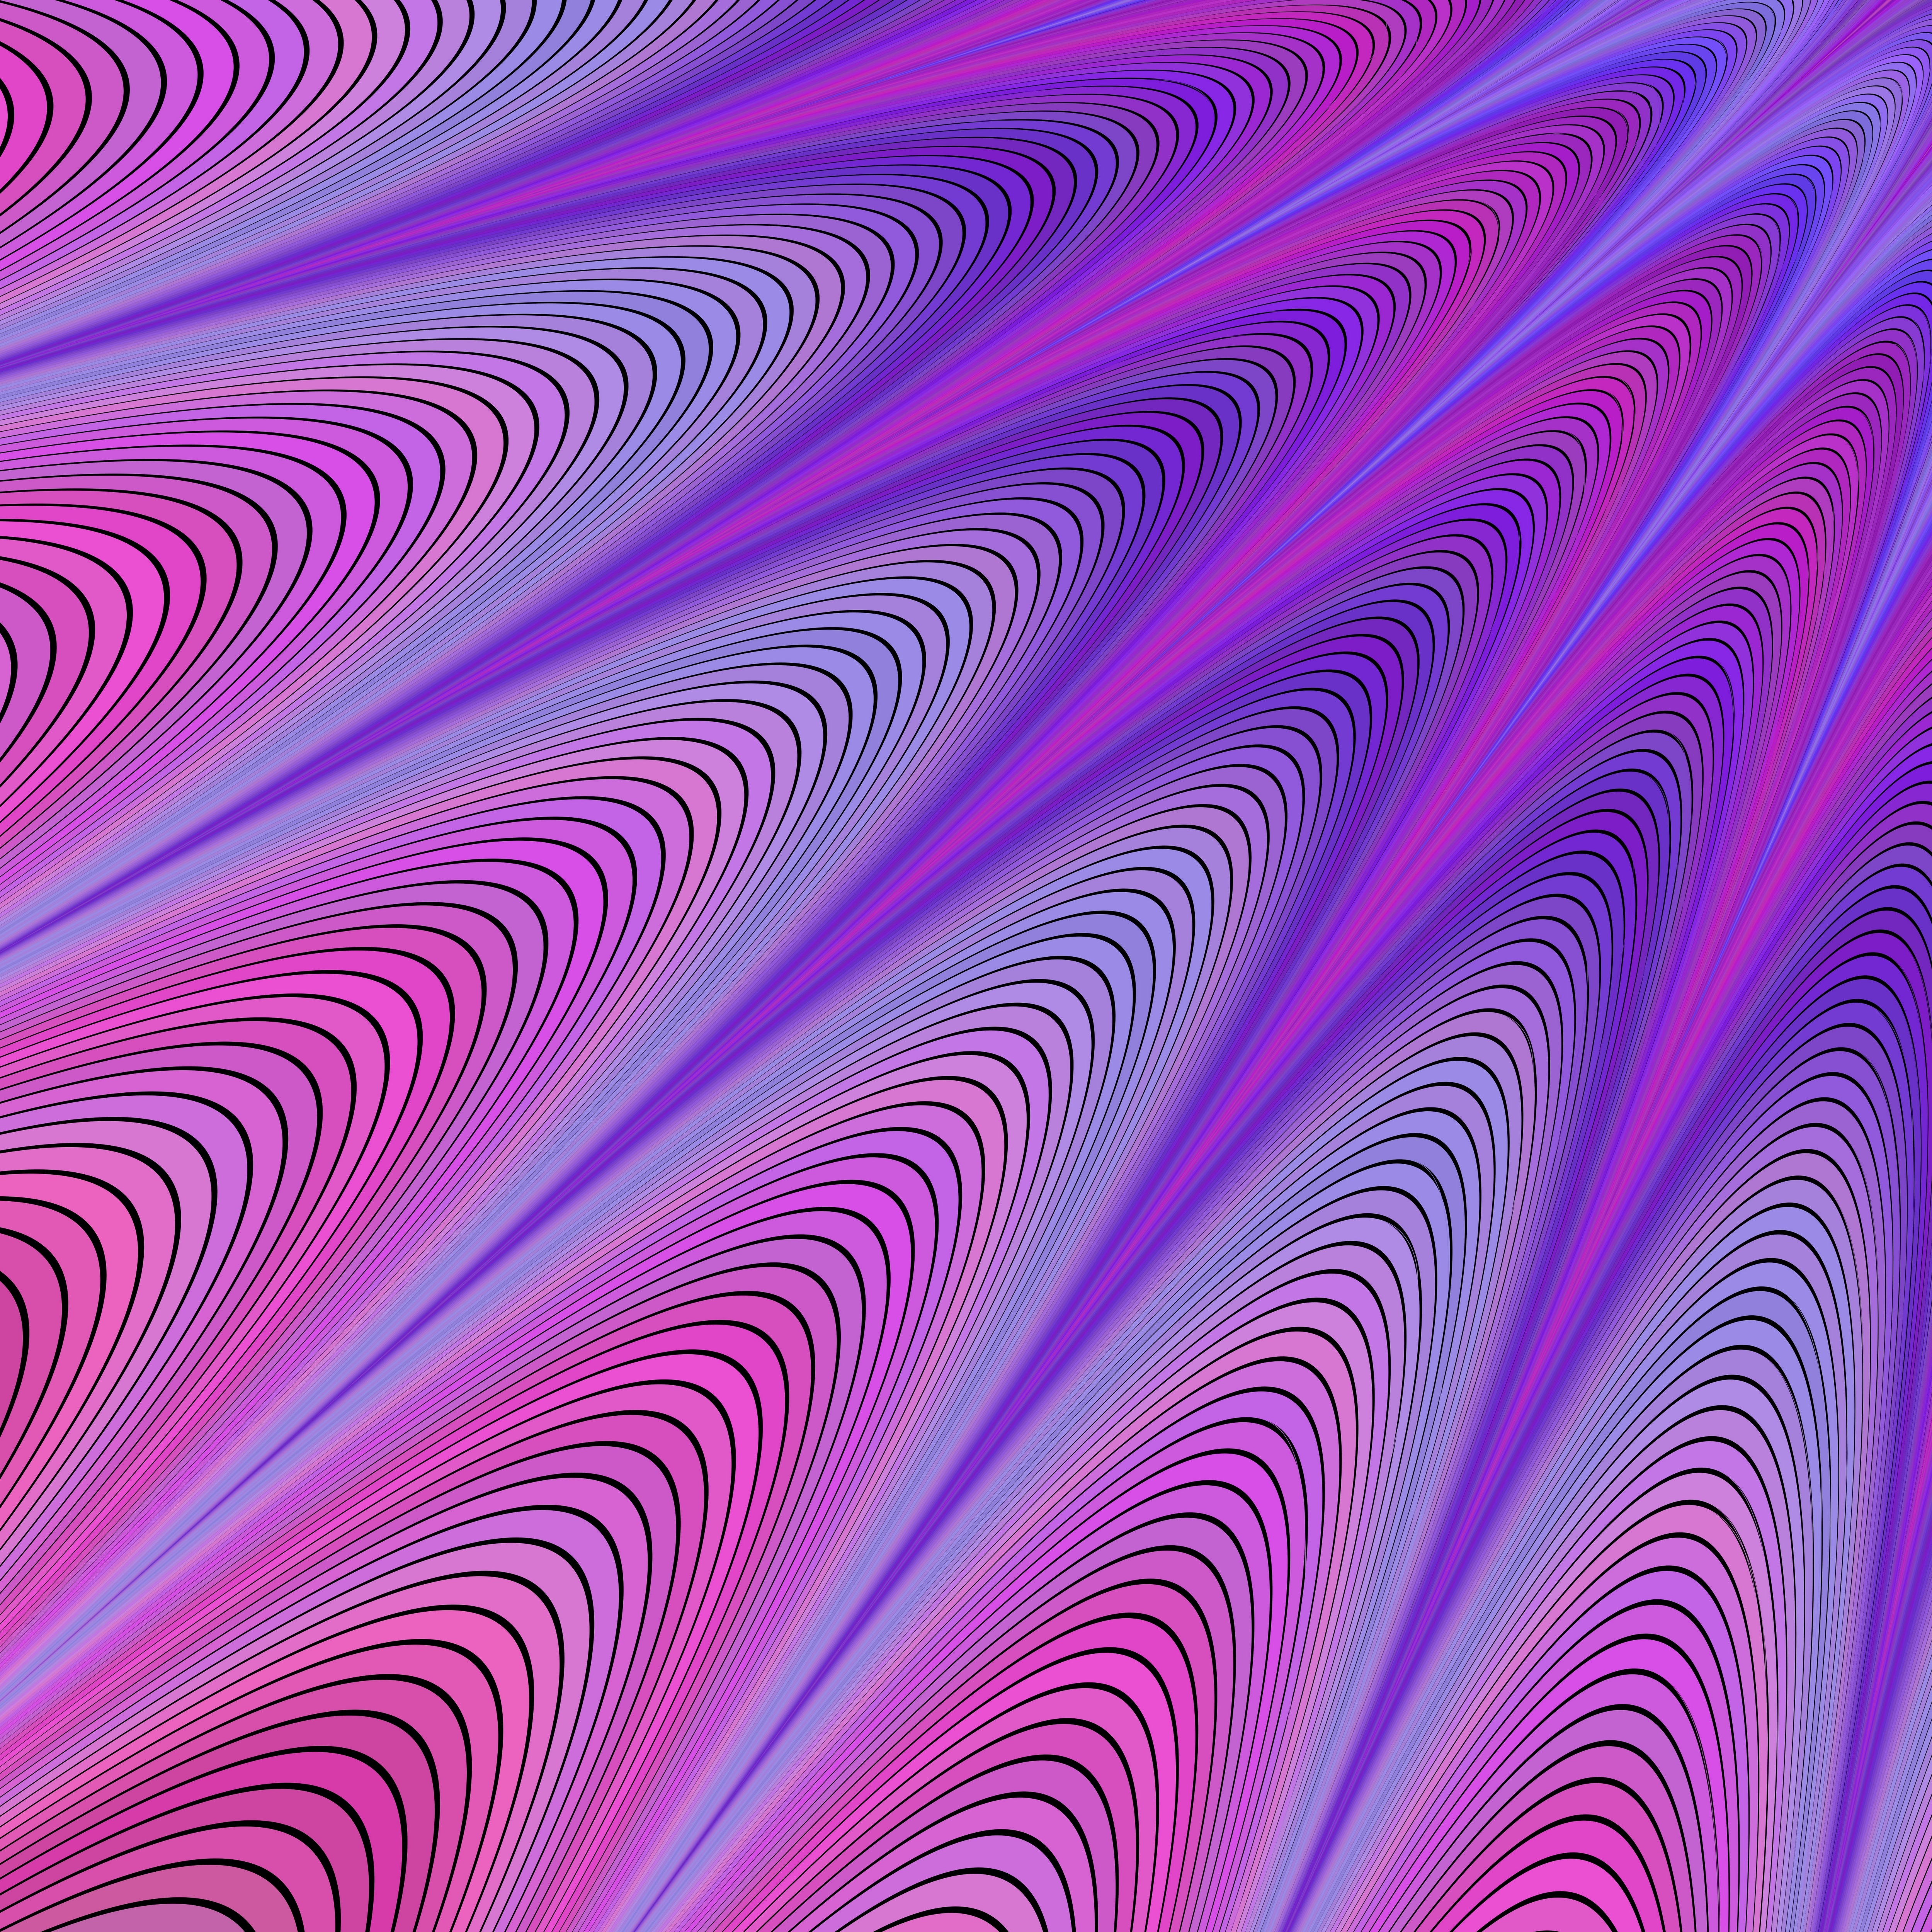 wavy, textures, raised, pink, patterns, texture, relief Full HD